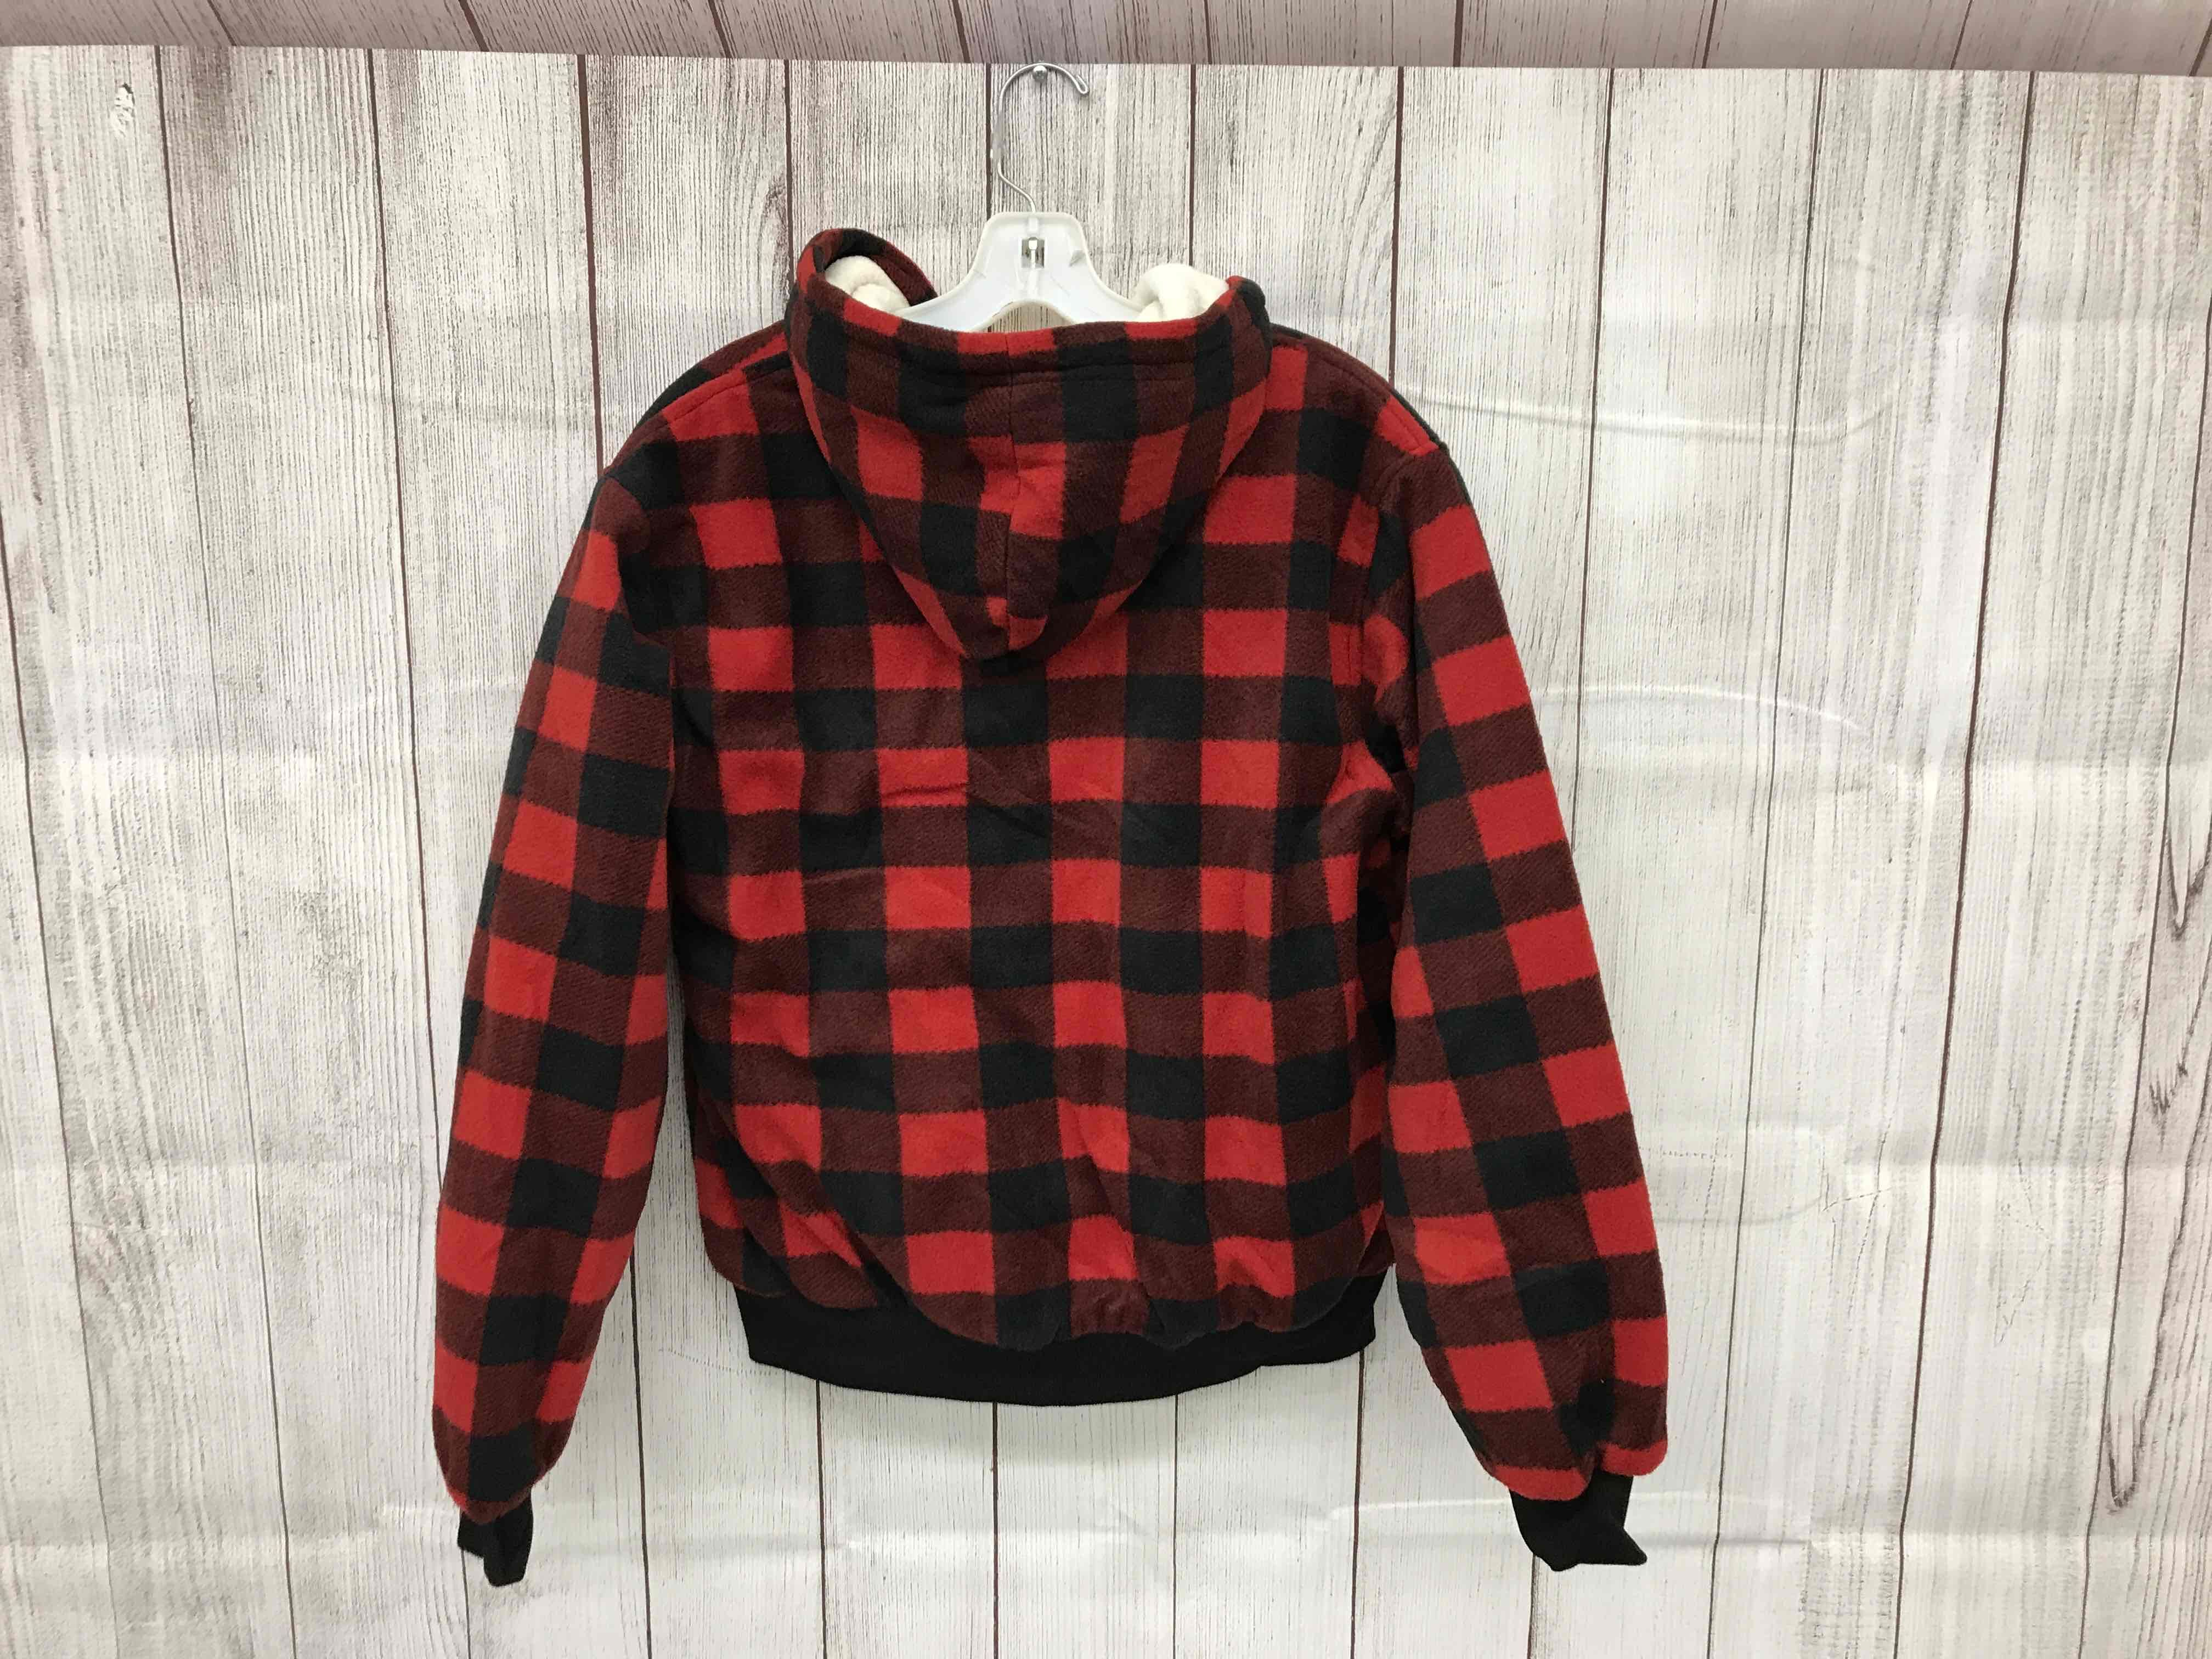 Trufit Women's Sherpa Lined Hooded Jacket Red Plaid Small | eBay